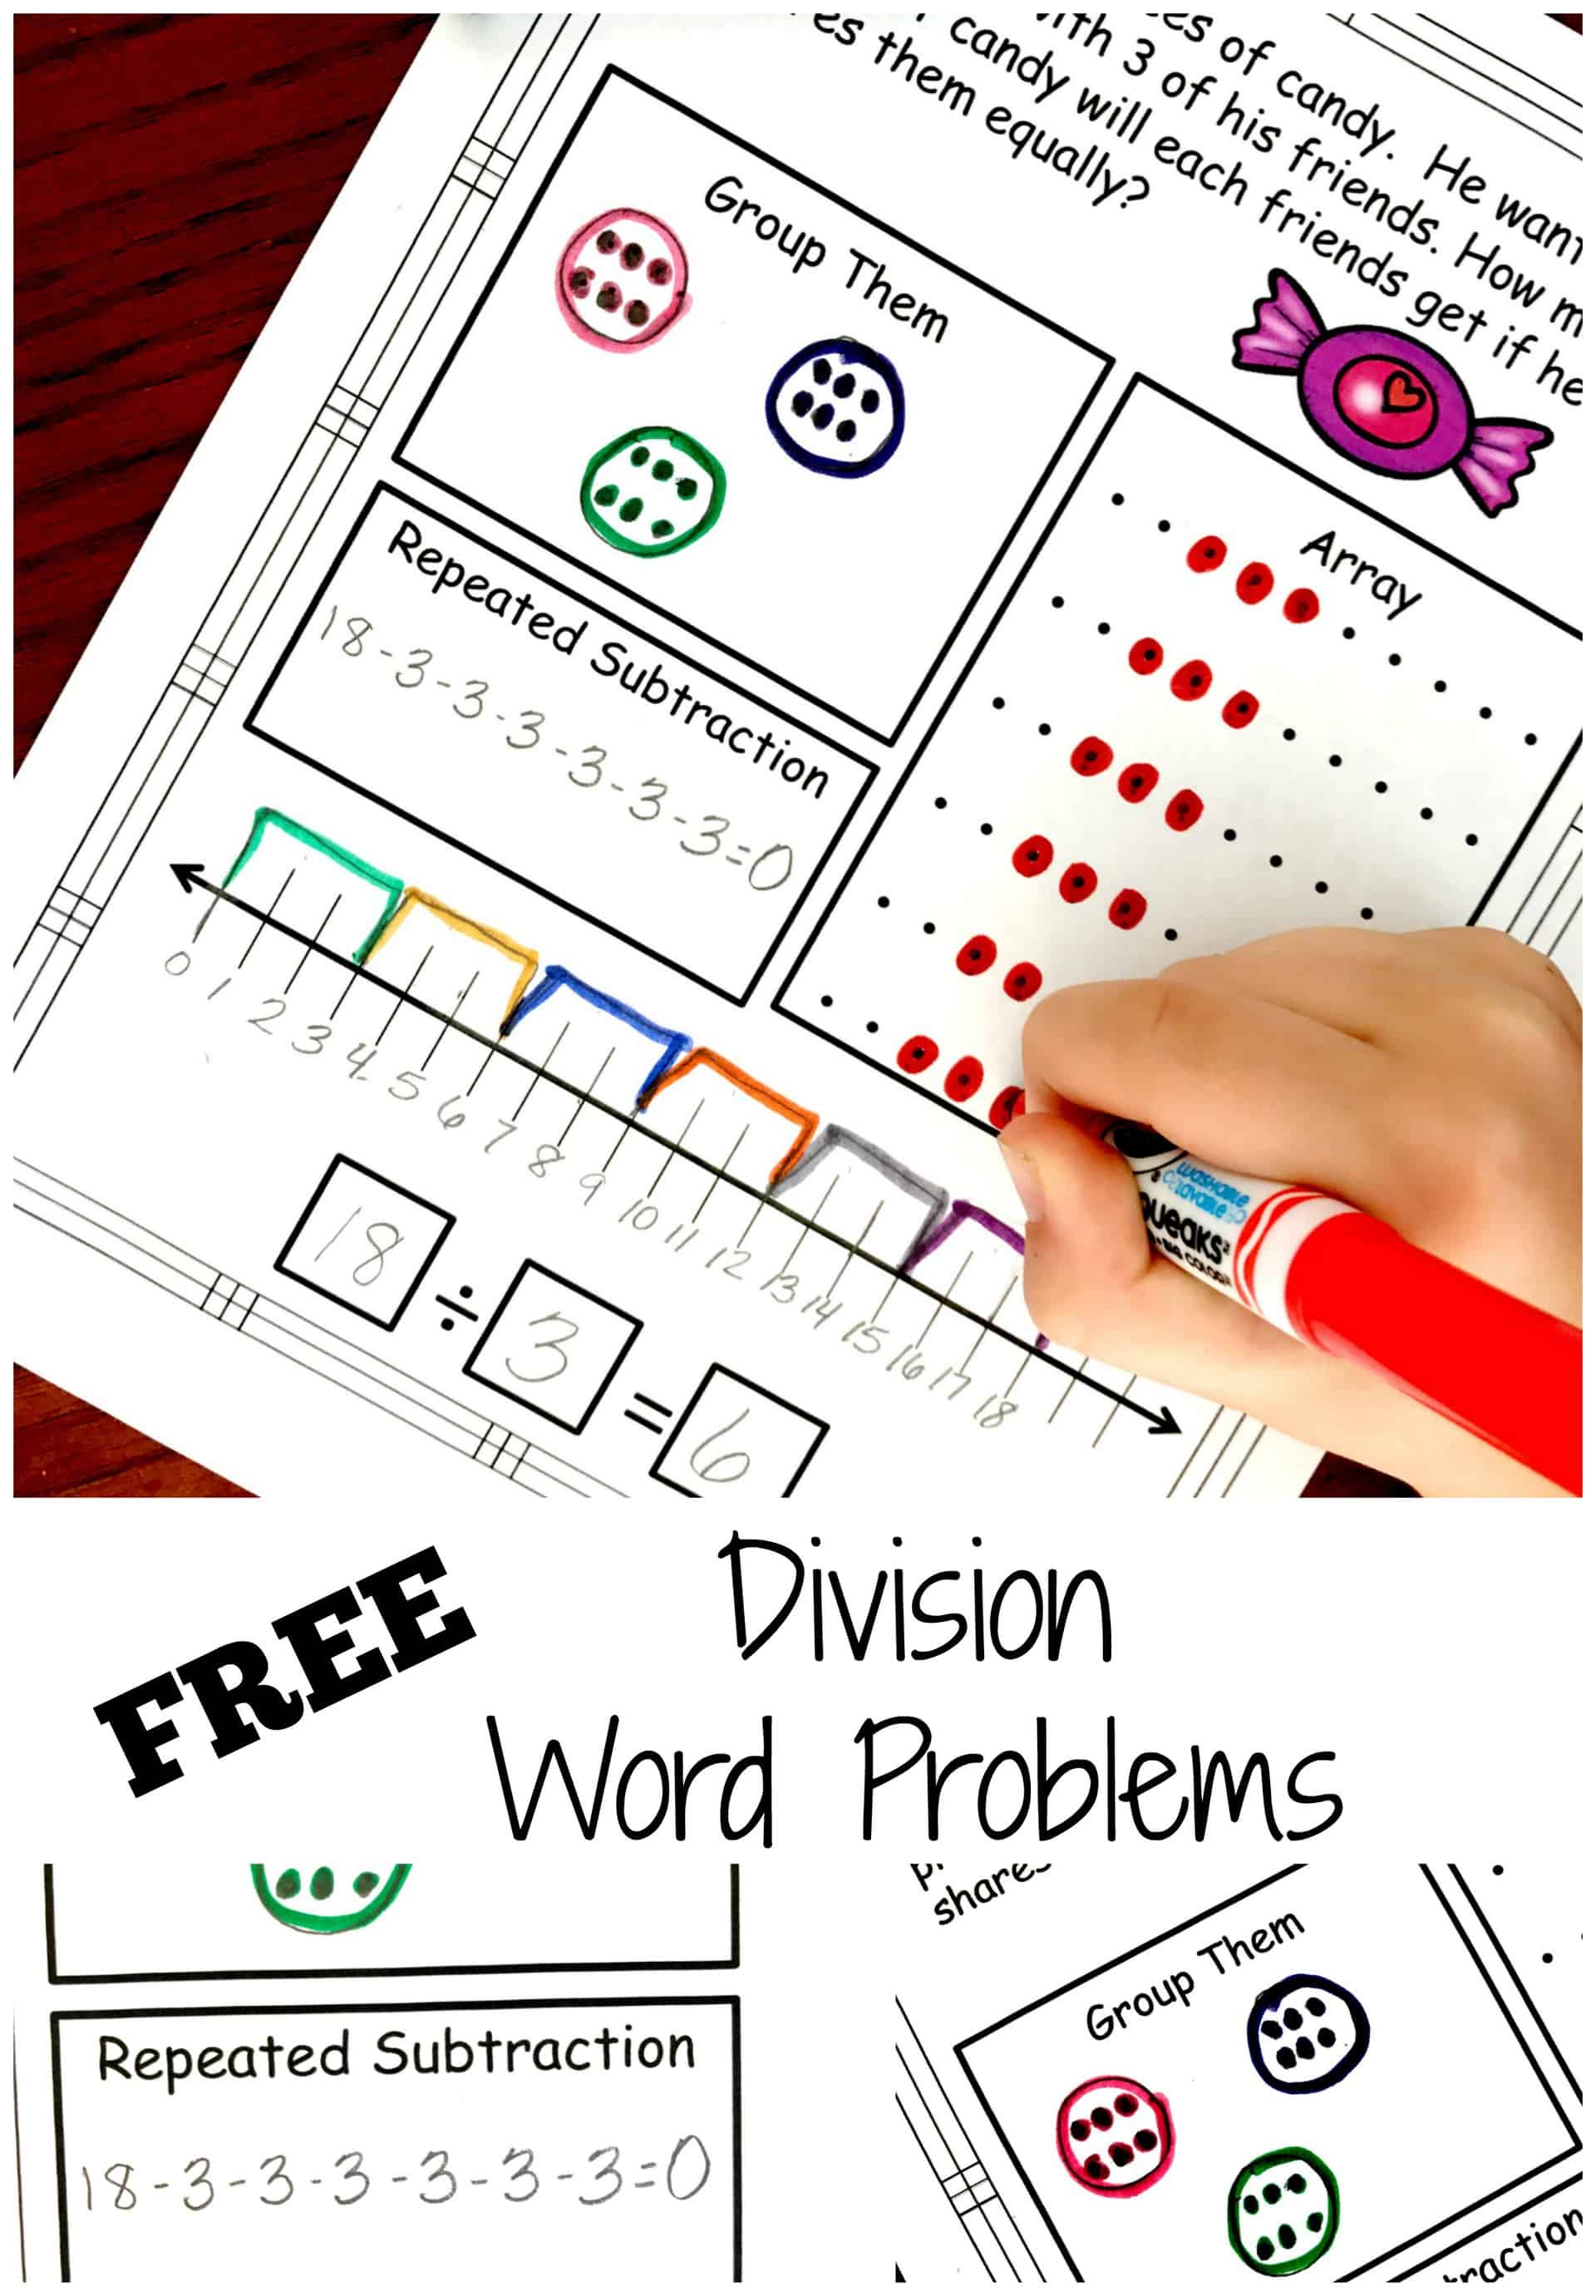 FREE Division Word Problems with Five Strategies To Solve